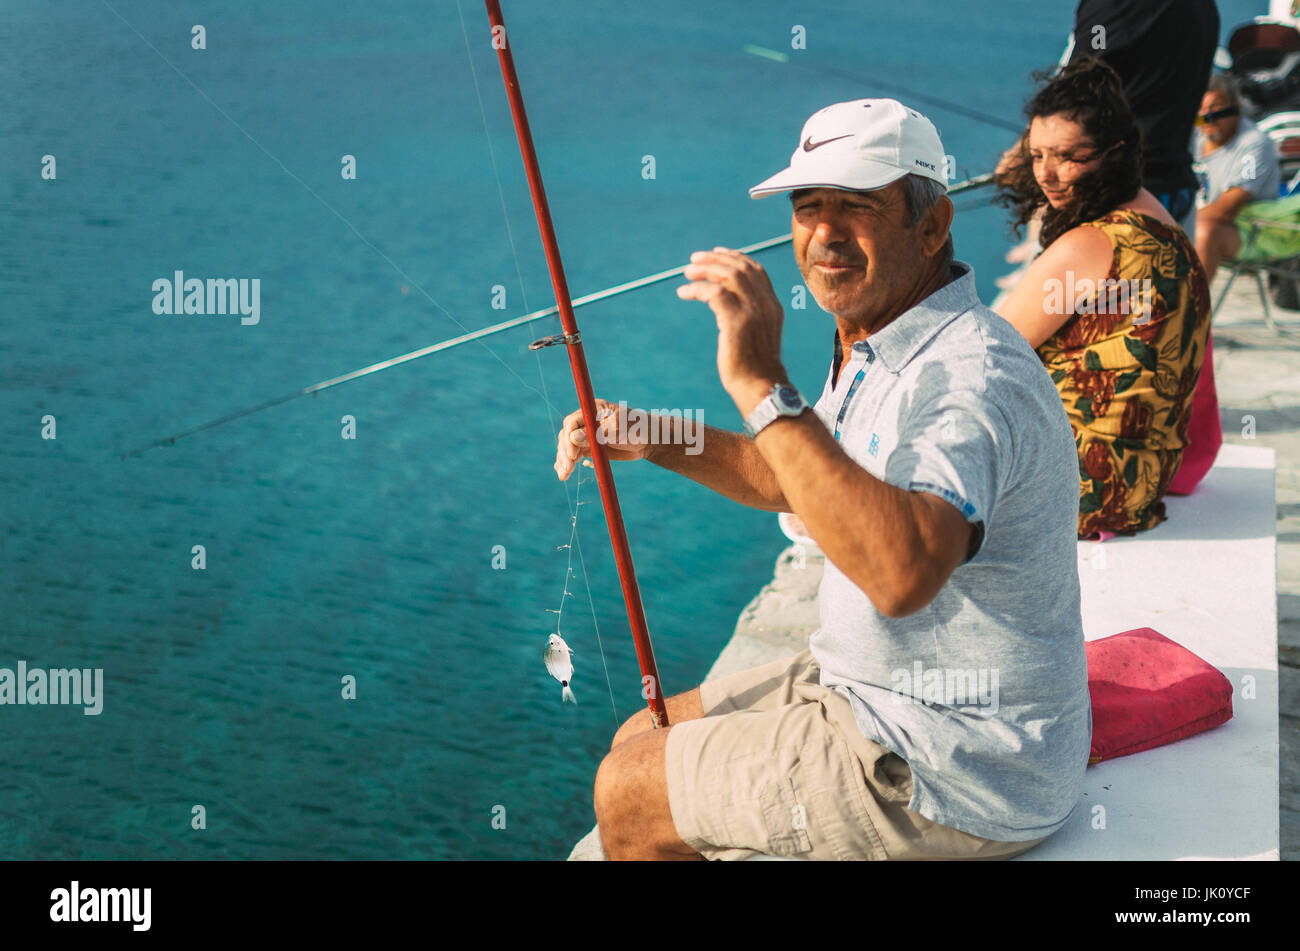 Pefkohori, Greece - May 26, 2015: Man wearing a cap shows his catch while fishing in the Aegean sea Stock Photo